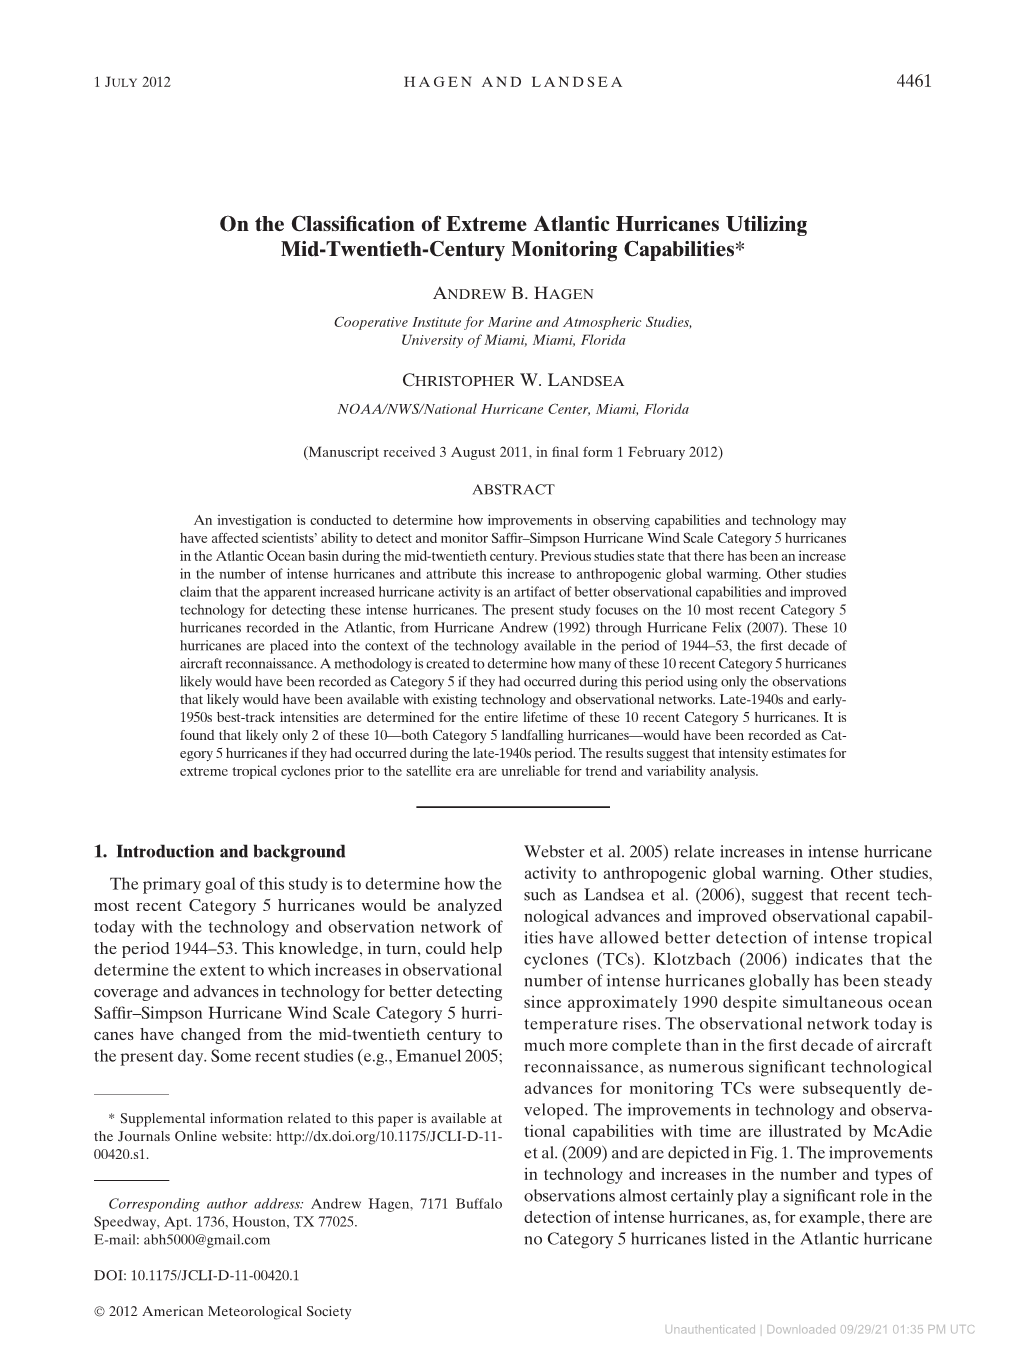 On the Classification of Extreme Atlantic Hurricanes Utilizing Mid